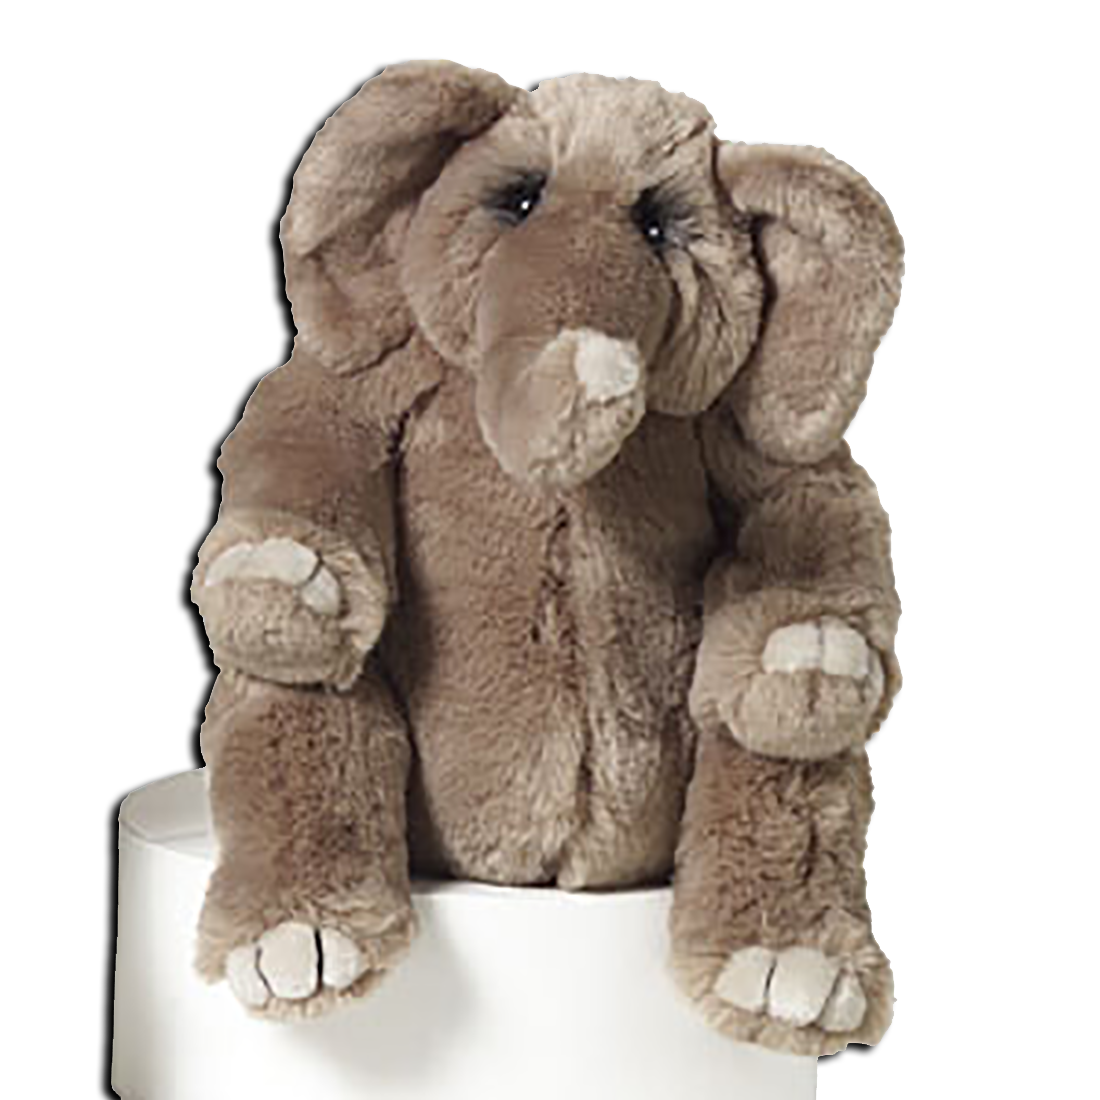 Lou Rankin the sculptor gave a licsening agreement to Dakin to create plush stuffed animals in the Lou Rankin tradition of life like elephants.